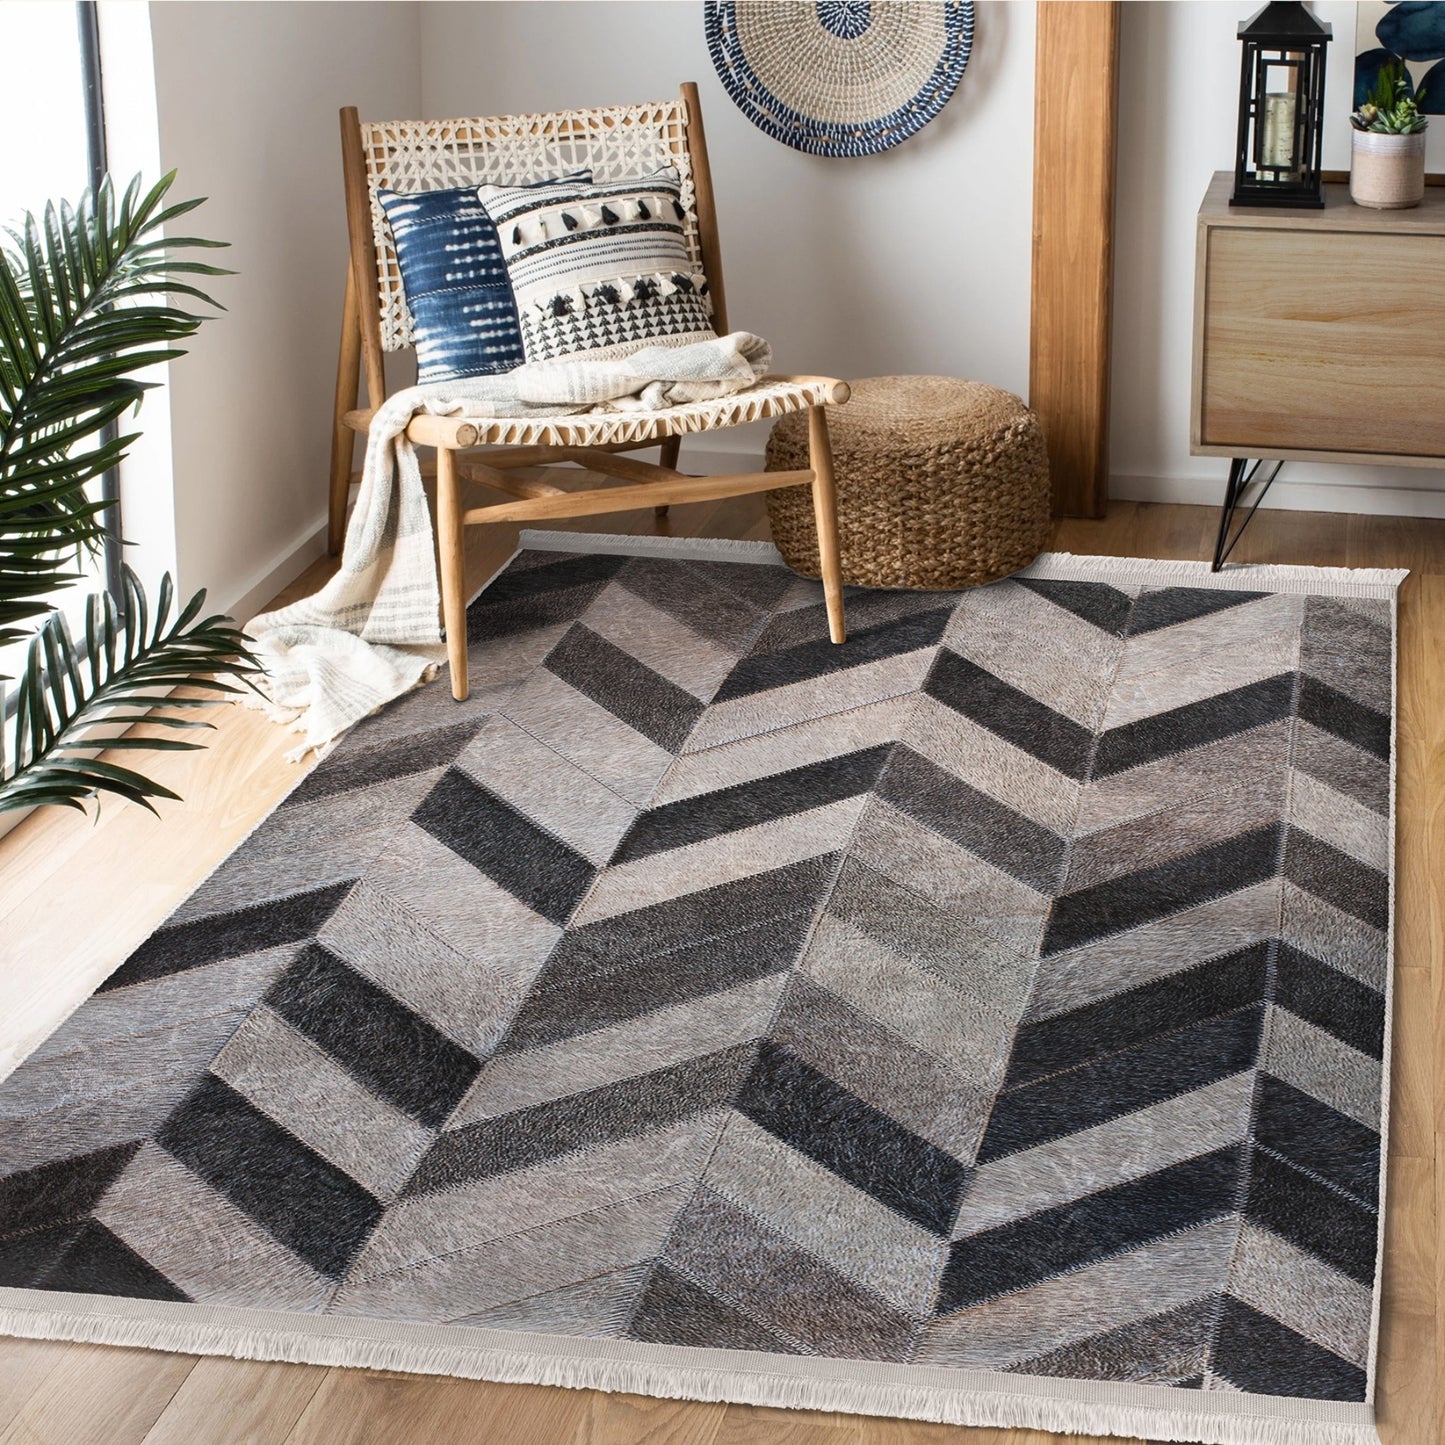 Decorative Area Rug with a Stylish Blend of Grey Hues